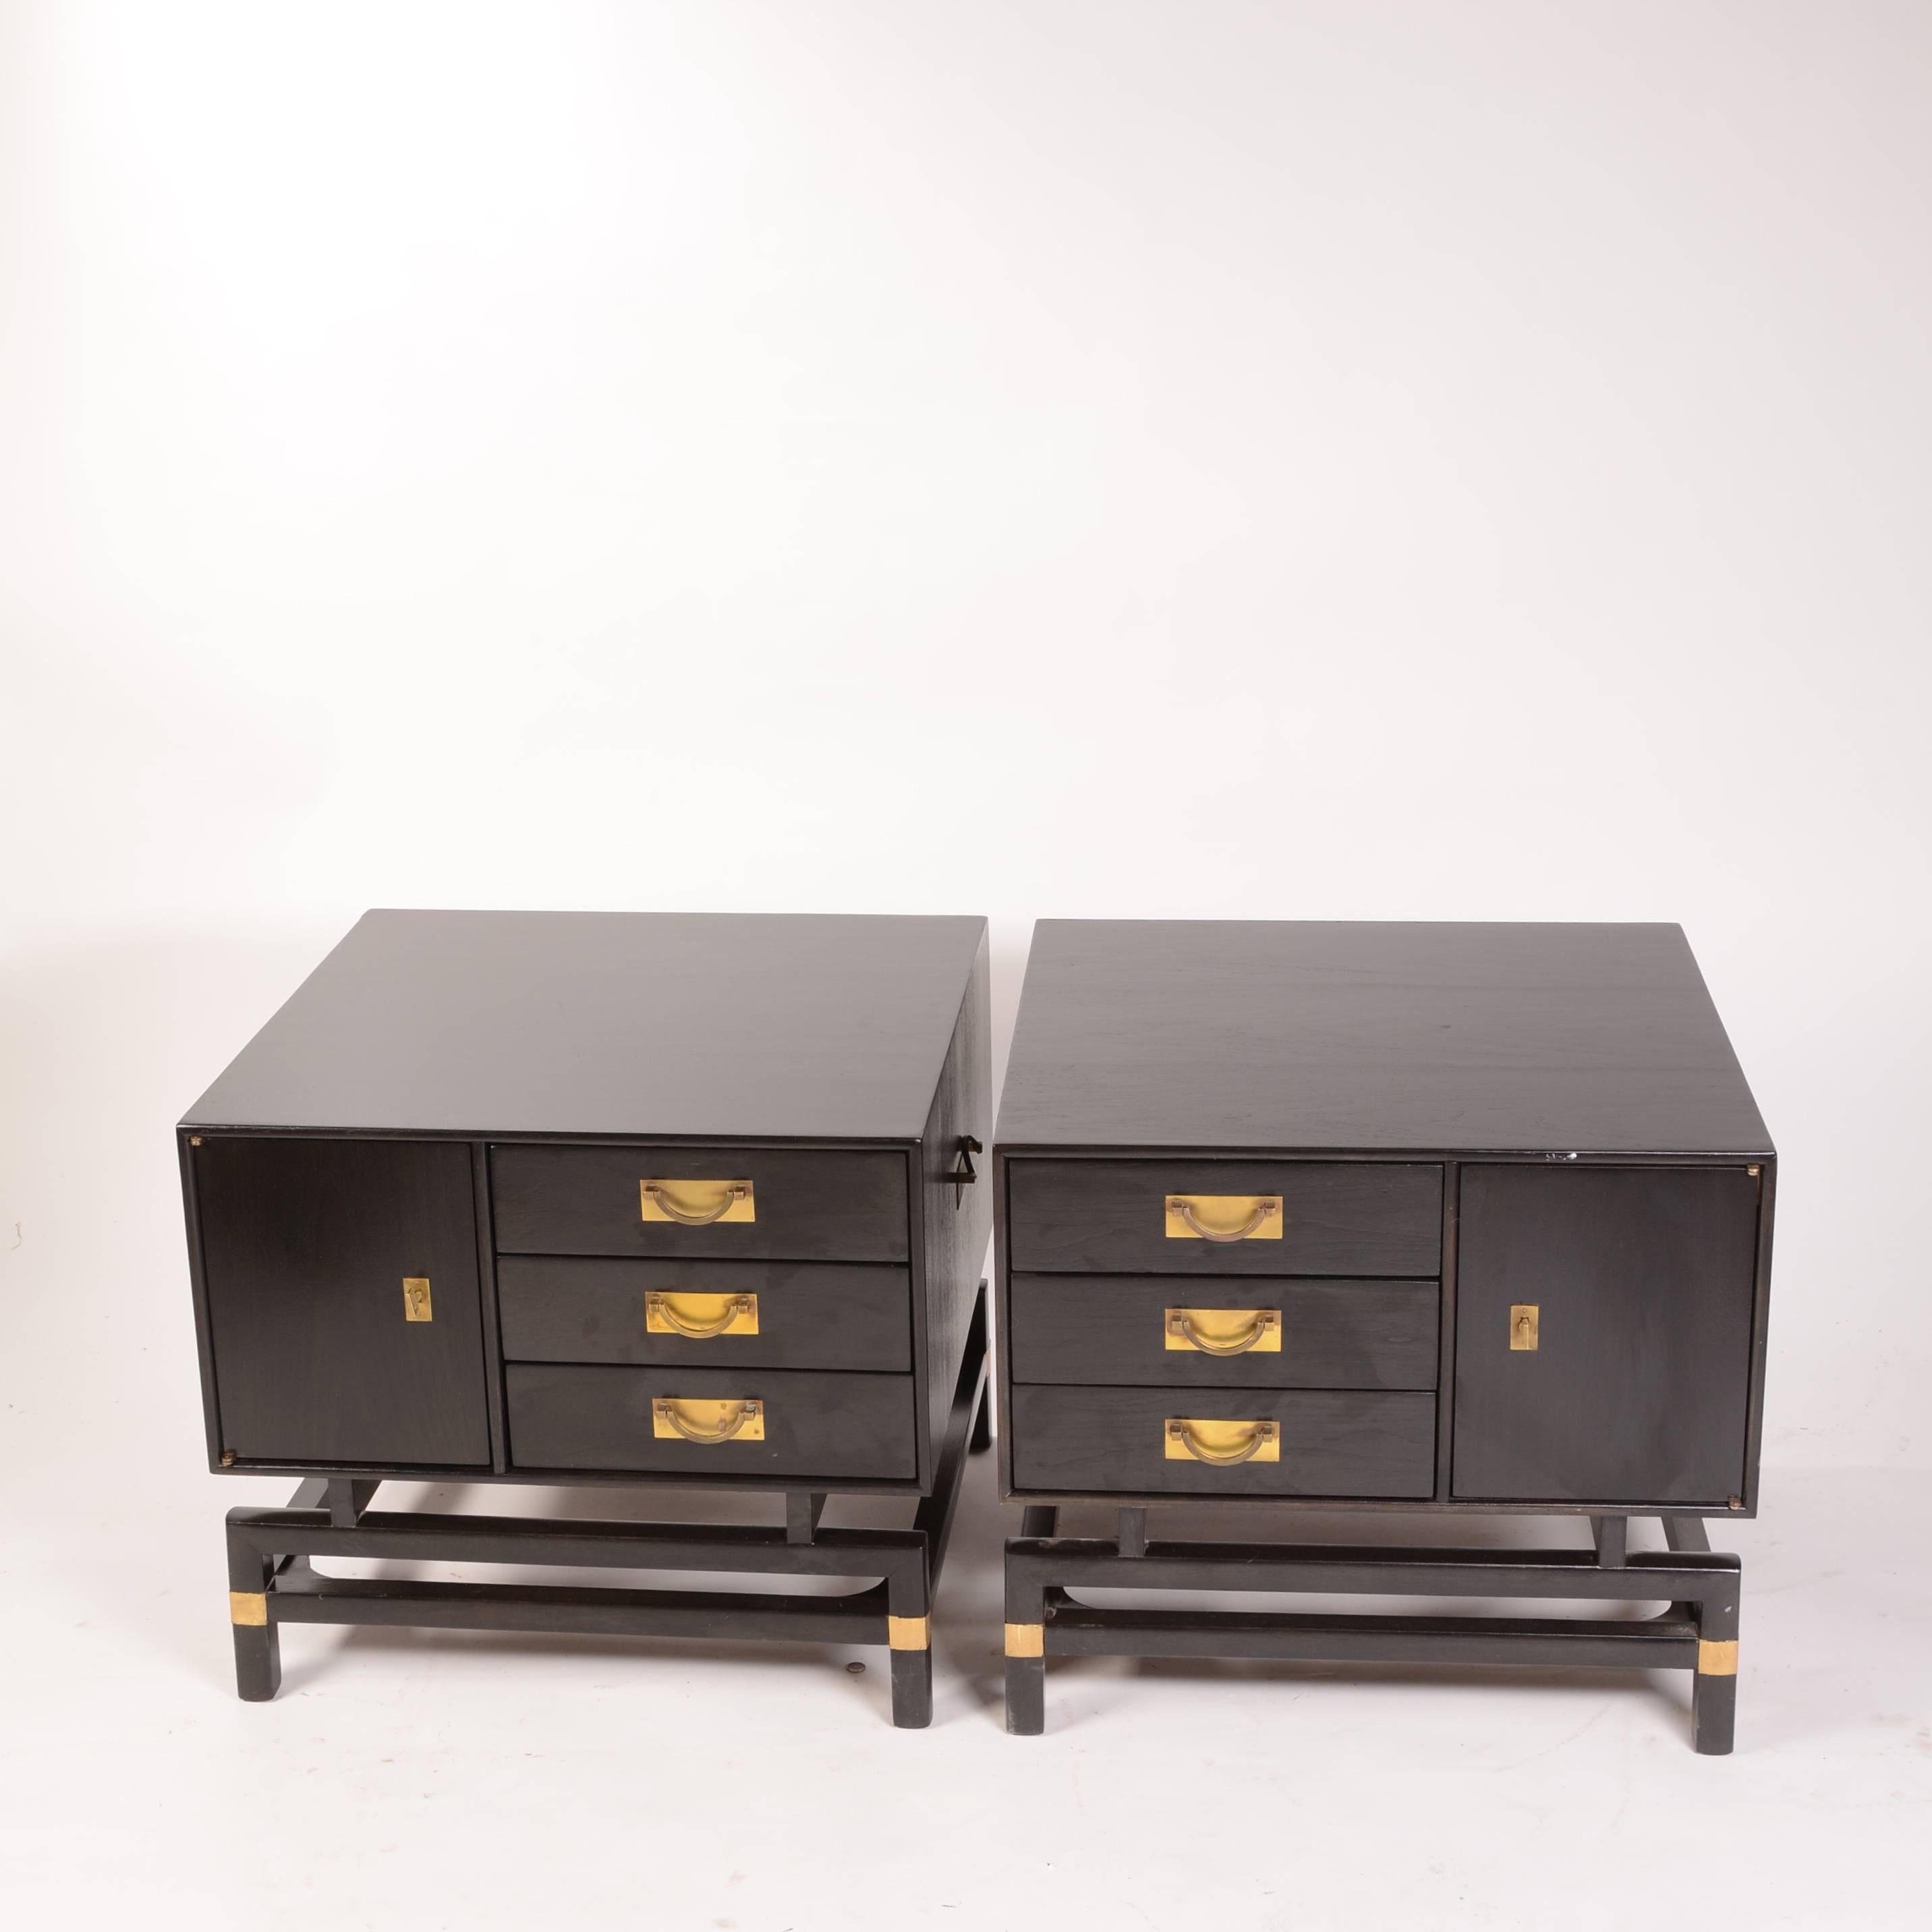 Pair of ebony and brass walnut cabinets/end tables, stamped Hickory Manufacturing Co, interior space, with three drawers.